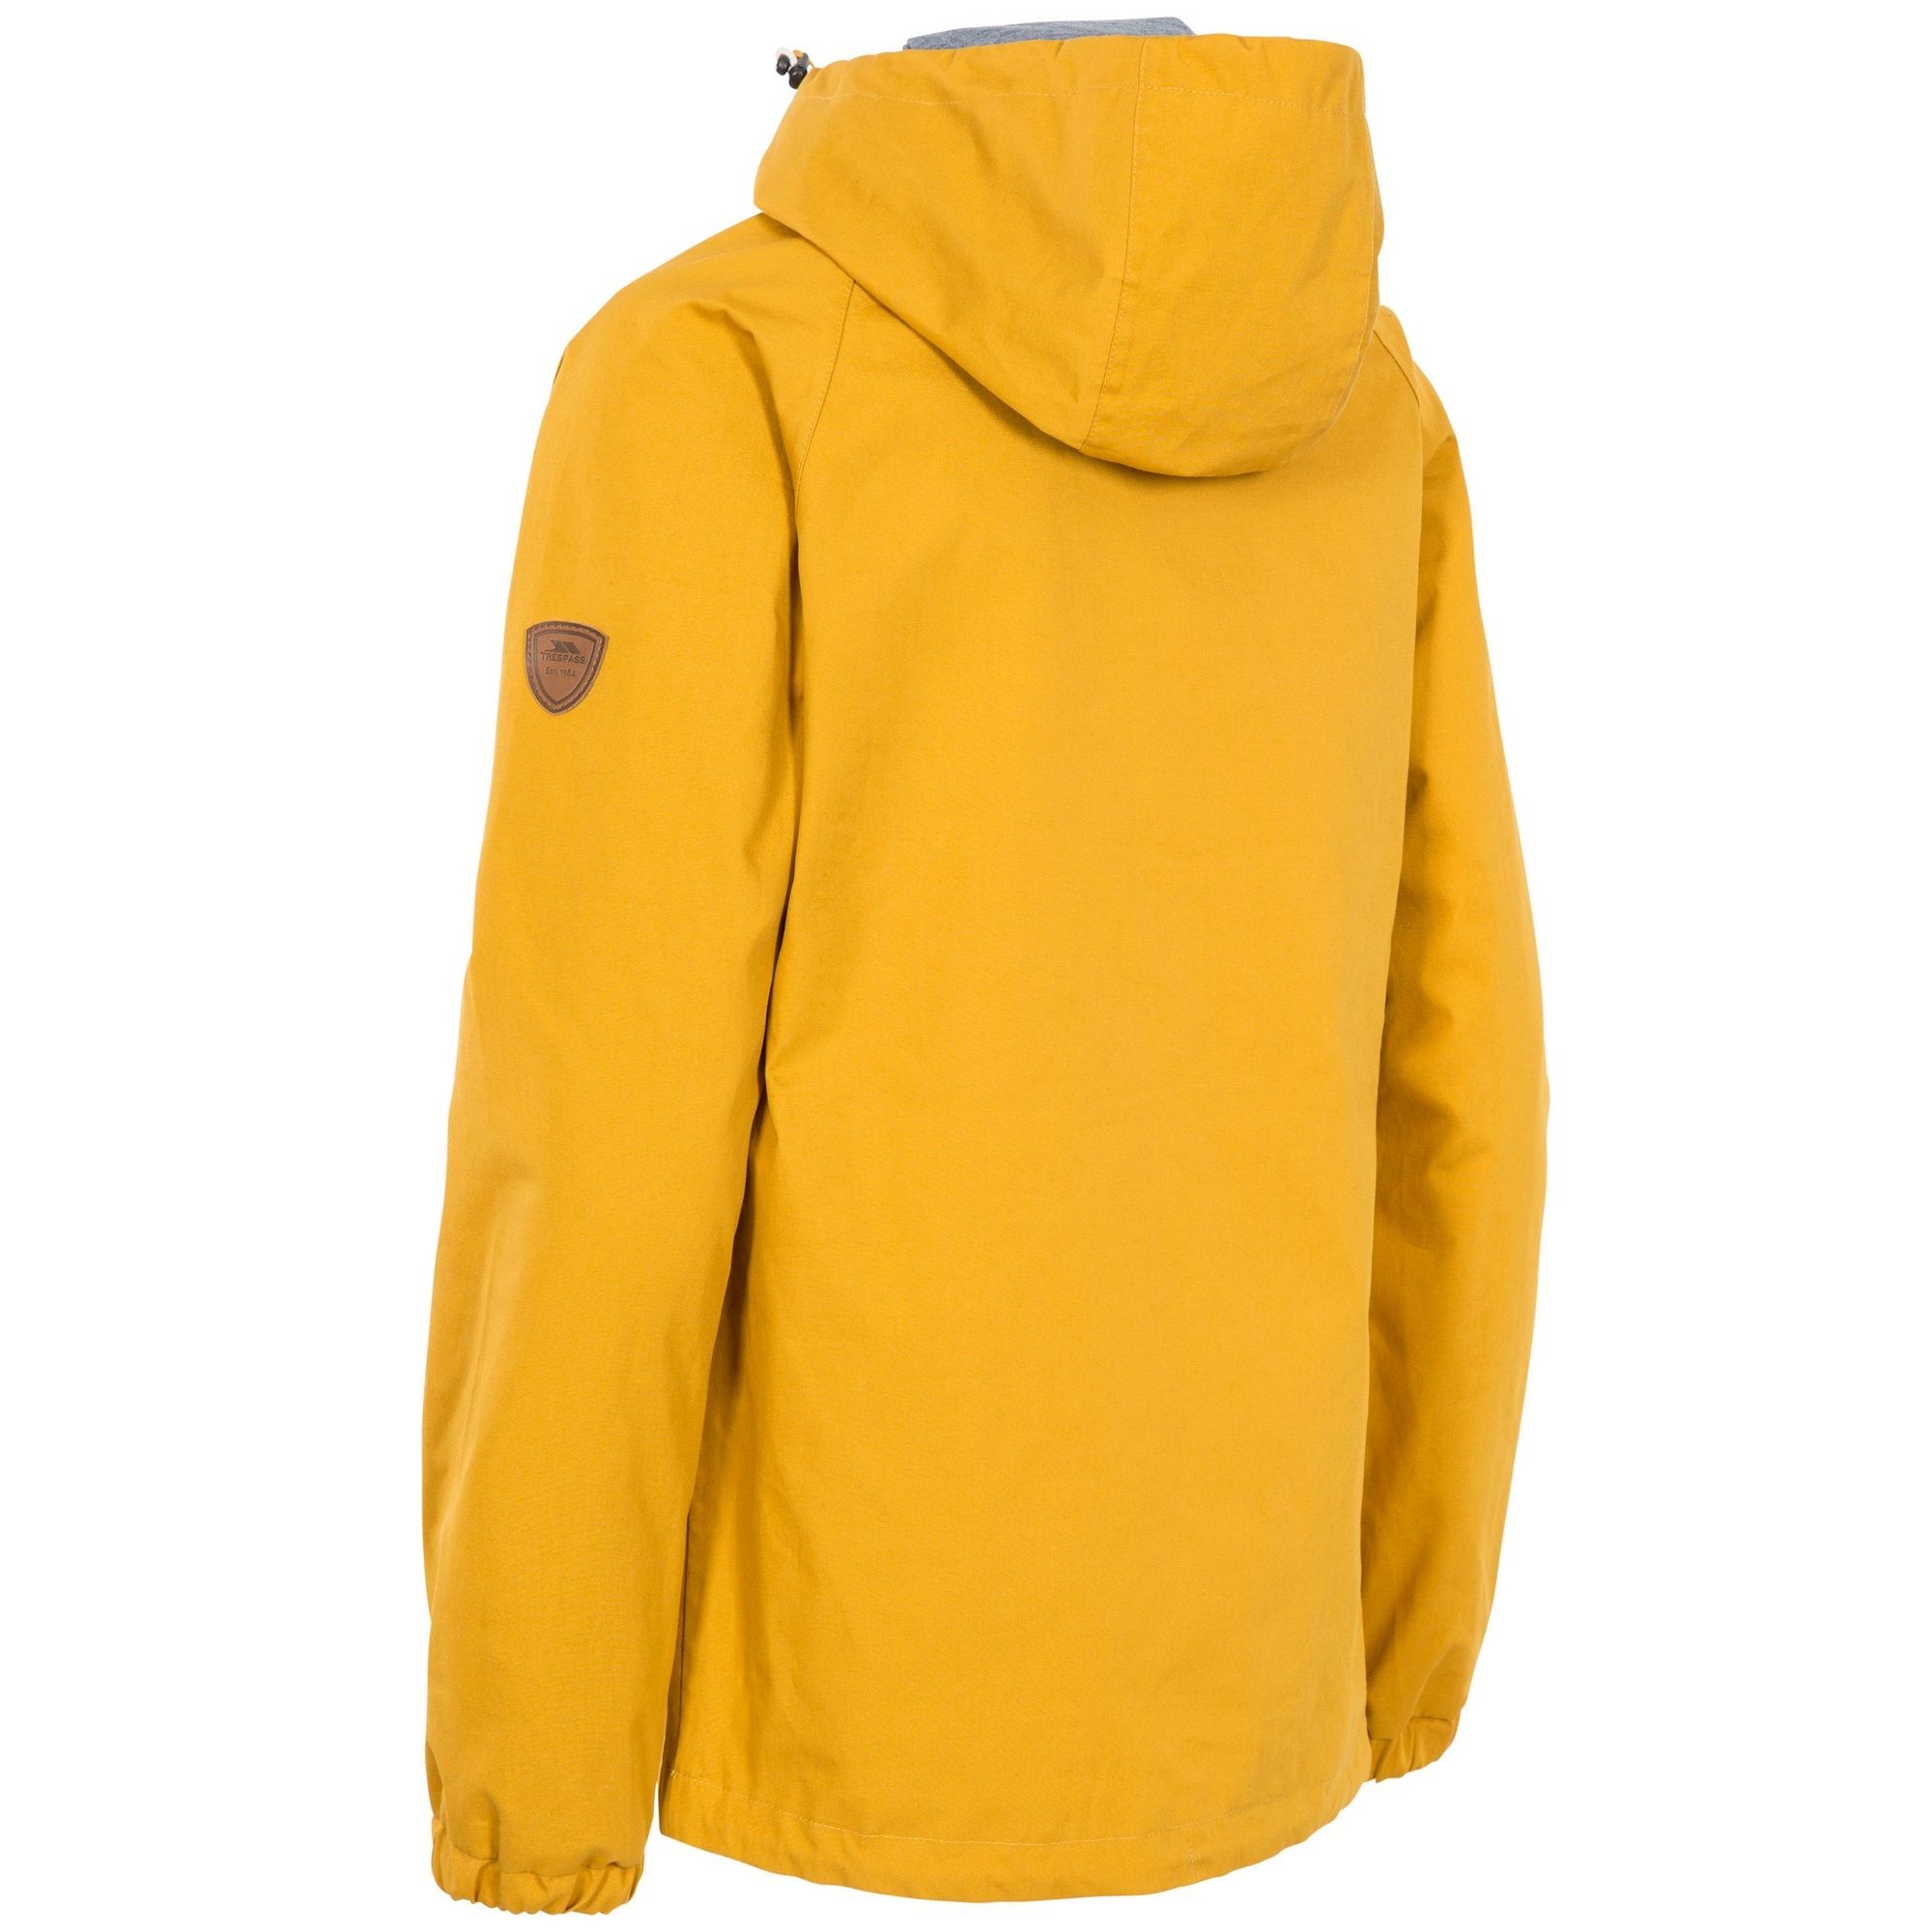 Shell: 100% Cotton, TPU membrane, Lining: 100% Polyester. Taffeta lining. Grey marl jersey lining in hood. Over the head style. Side entry zip. Grown on hood with adjusters. Large pouch pocket. 2 zip pockets. Full elastic cuff. Waterproof 3000mm, breathable 3000mvp, windproof, taped seams. Trespass Womens Chest Sizing (approx): XS/8 - 32in/81cm, S/10 - 34in/86cm, M/12 - 36in/91.4cm, L/14 - 38in/96.5cm, XL/16 - 40in/101.5cm, XXL/18 - 42in/106.5cm.